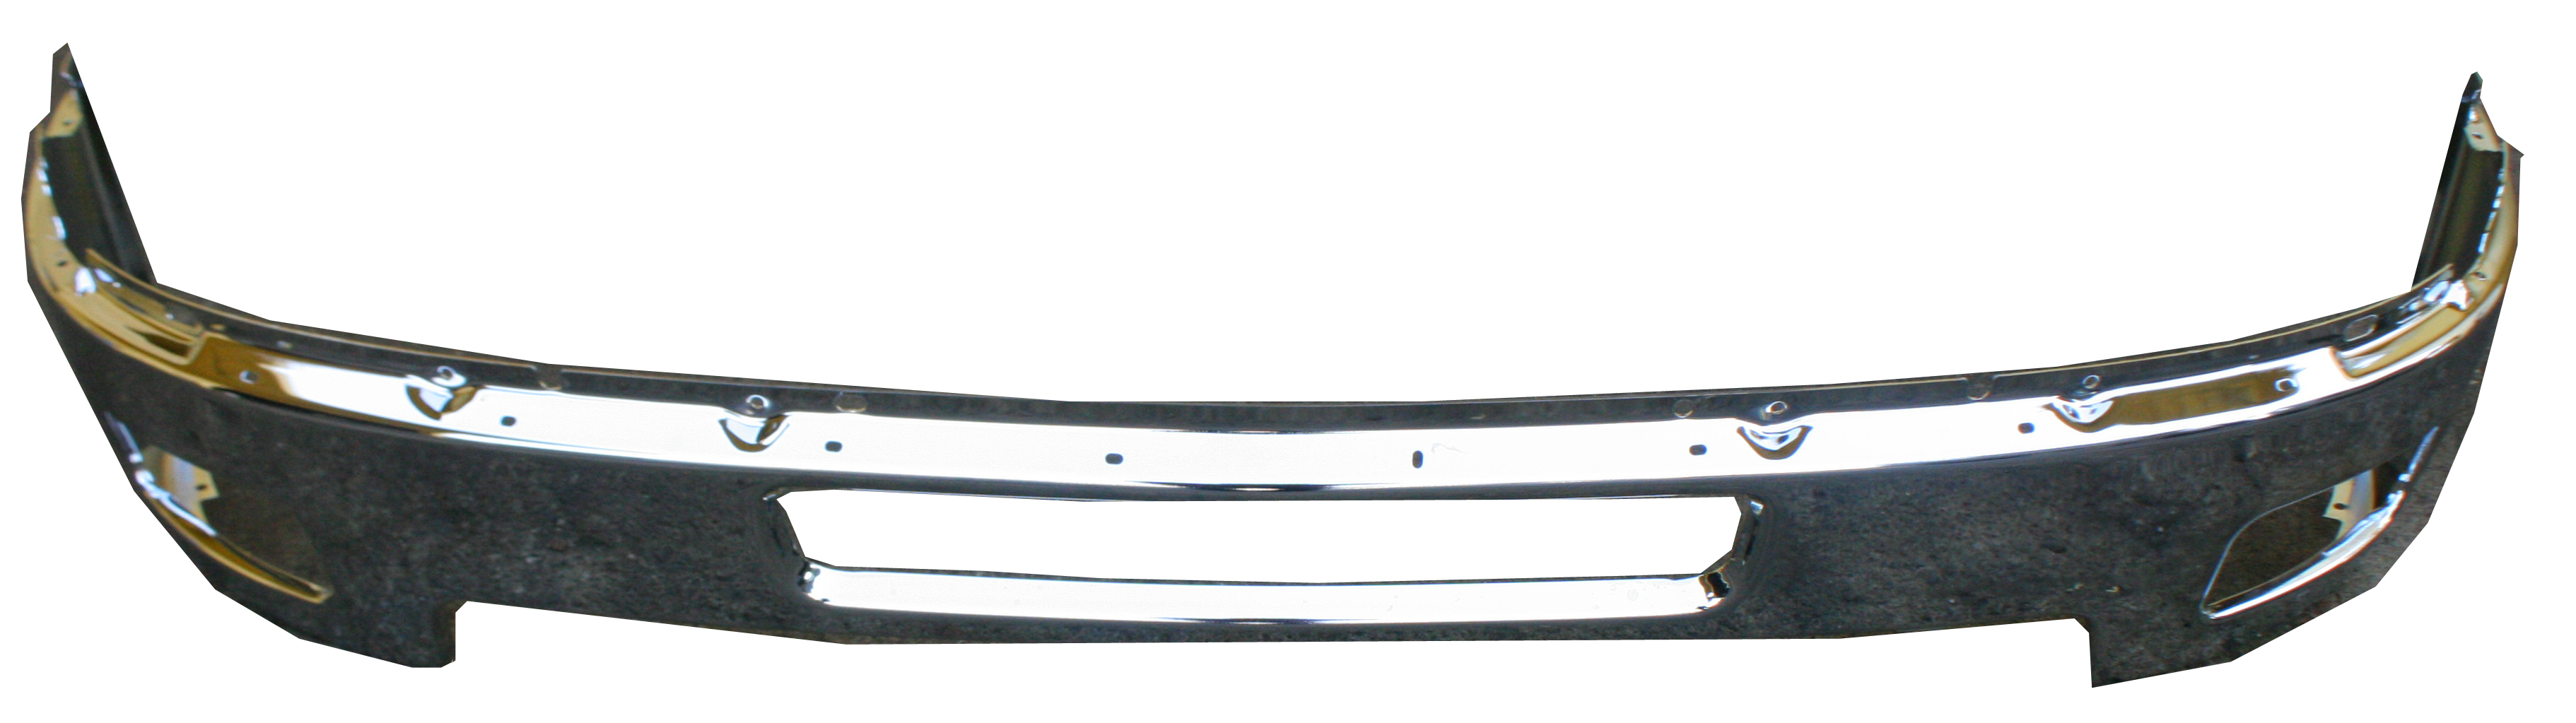 Aftermarket METAL FRONT BUMPERS for CHEVROLET - SILVERADO 3500 HD, SILVERADO 3500 HD,11-14,Front bumper face bar